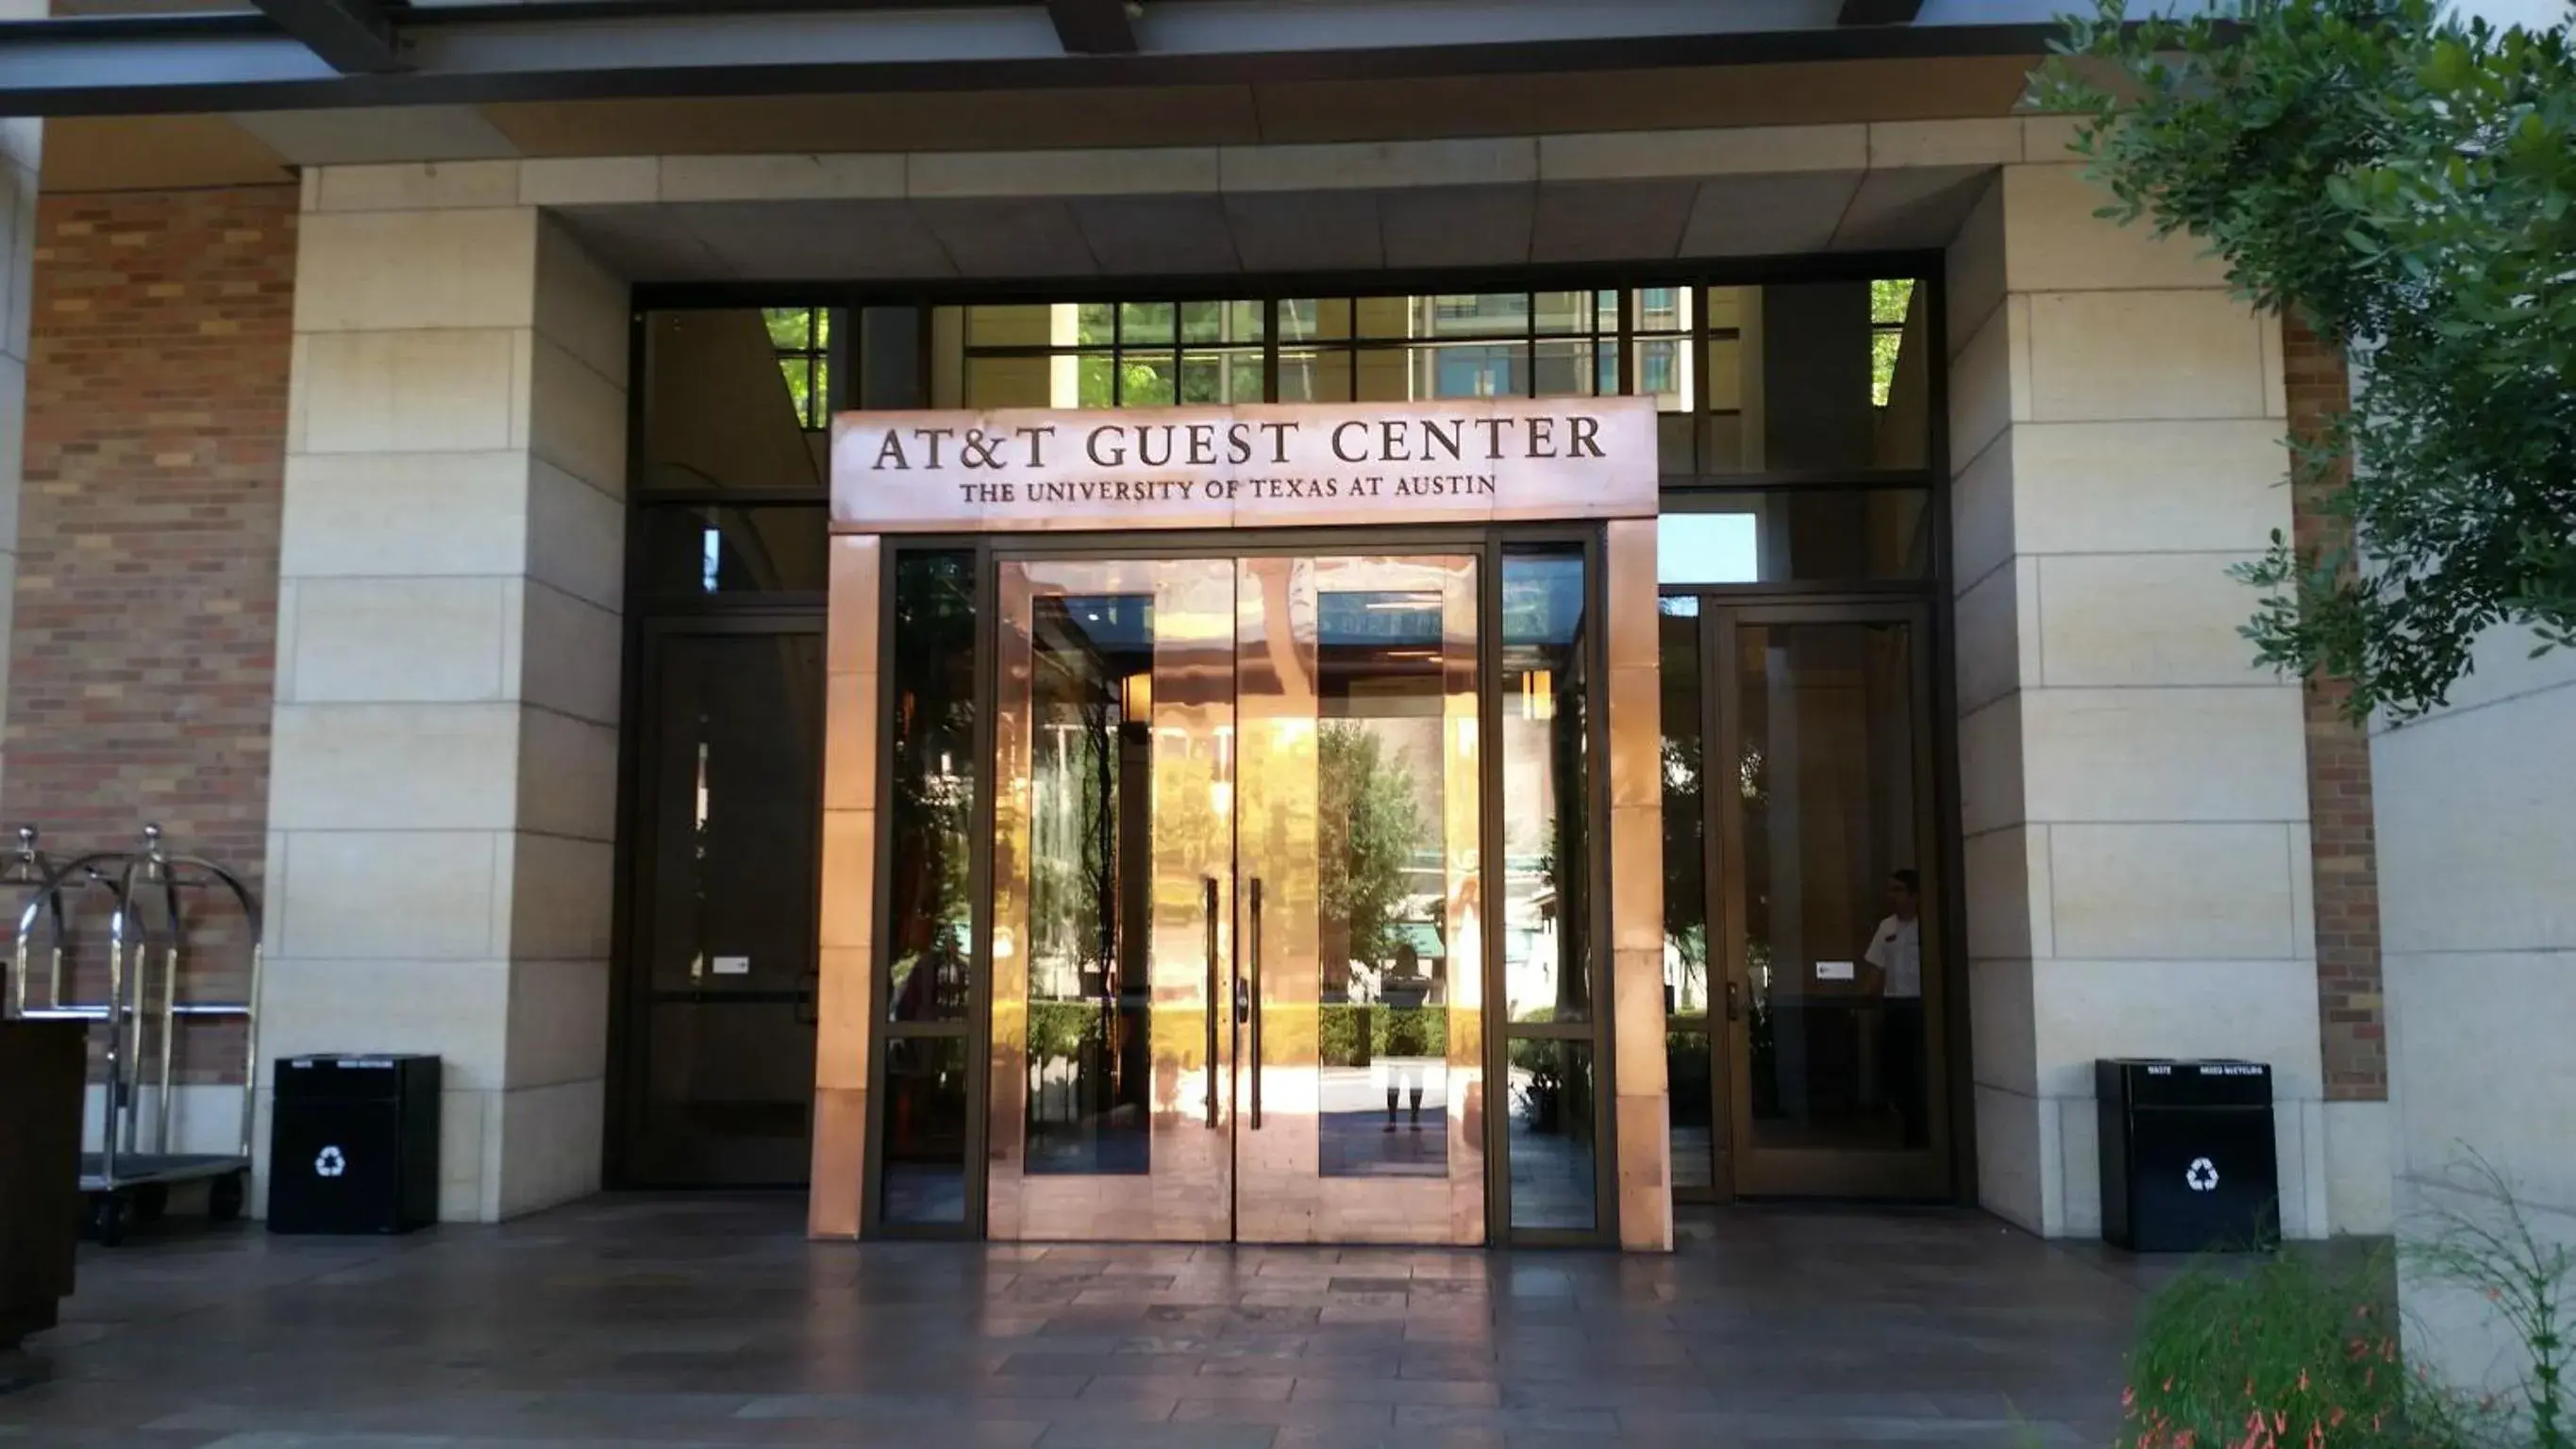 Facade/entrance in AT&T Hotel & Conference Center